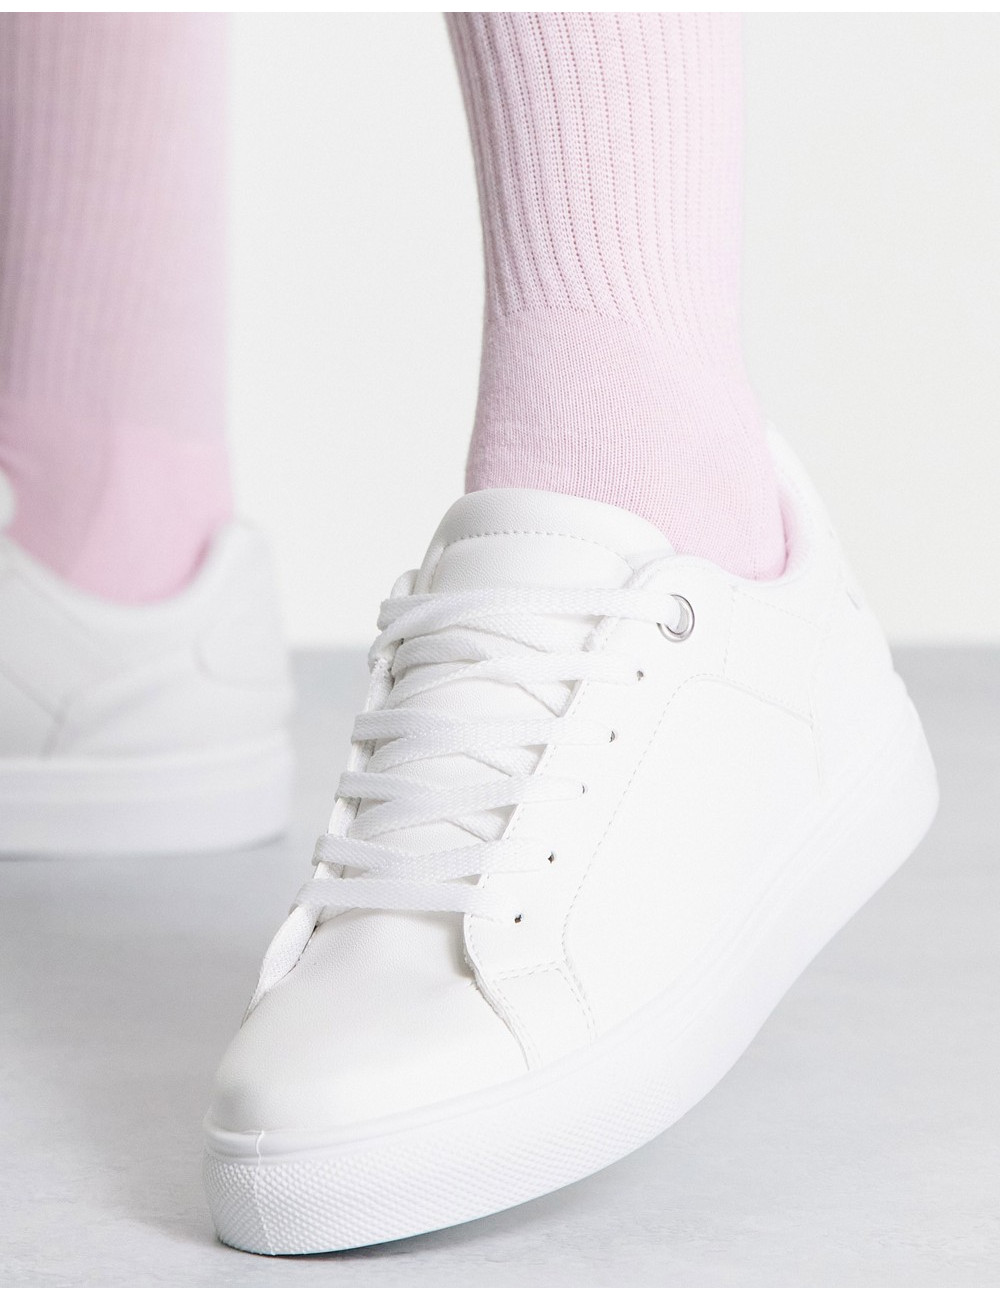 Topshop lace up trainer in...